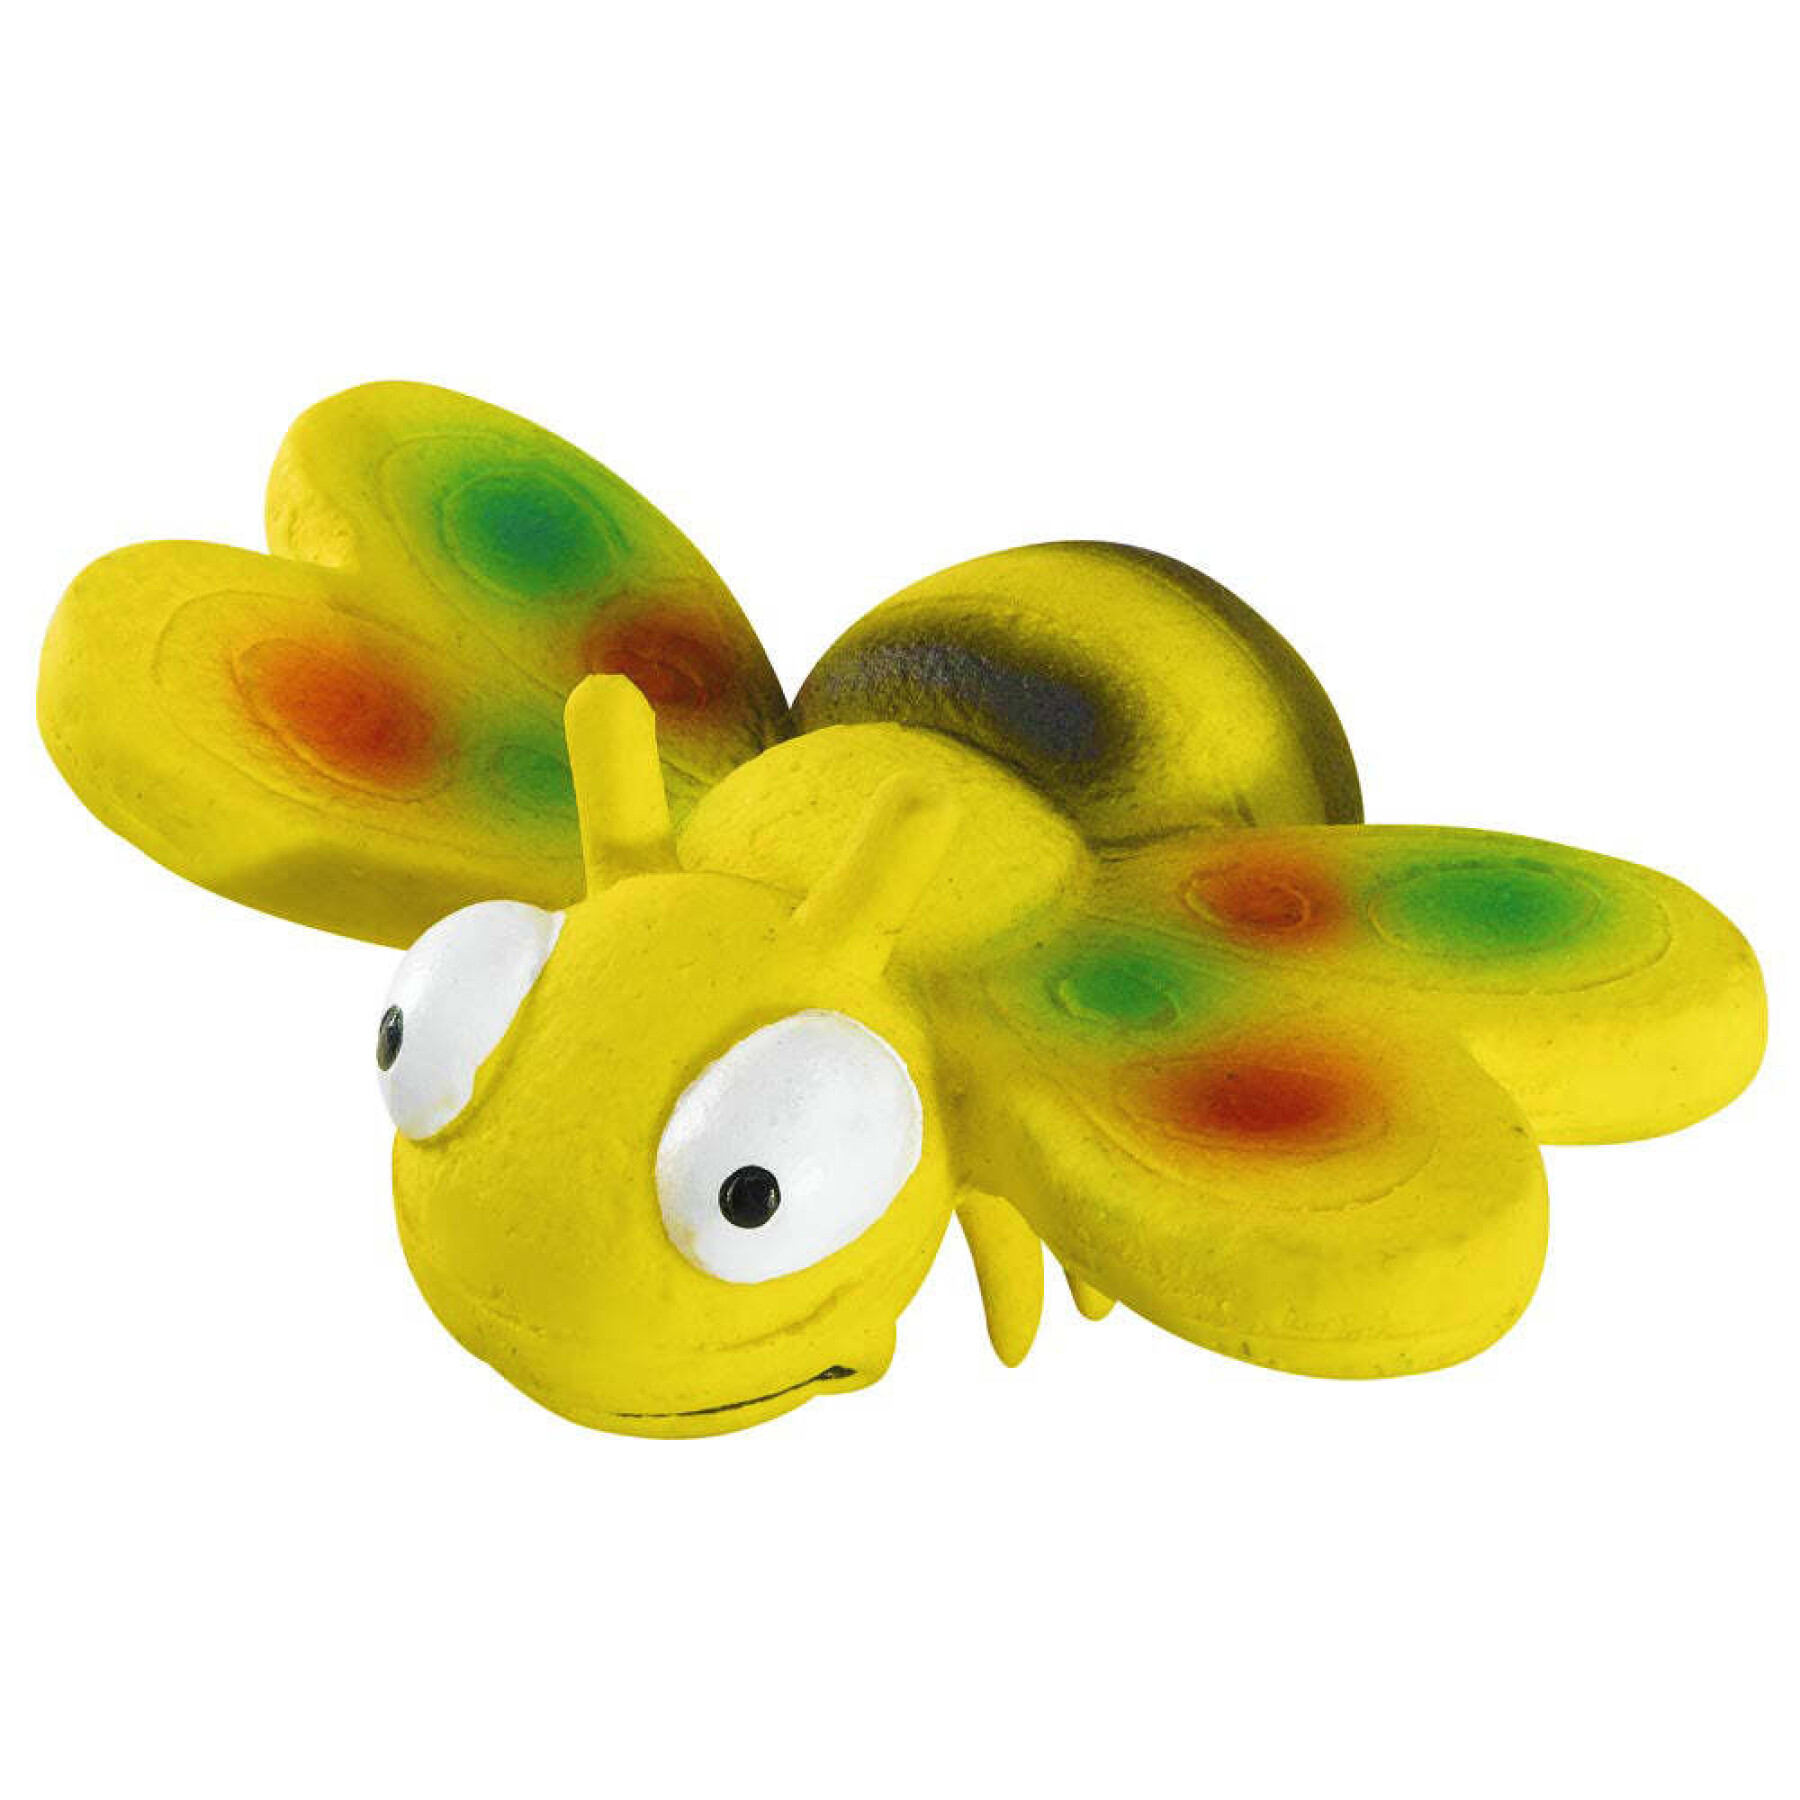 Dog toy insects Ferplast PA 5546